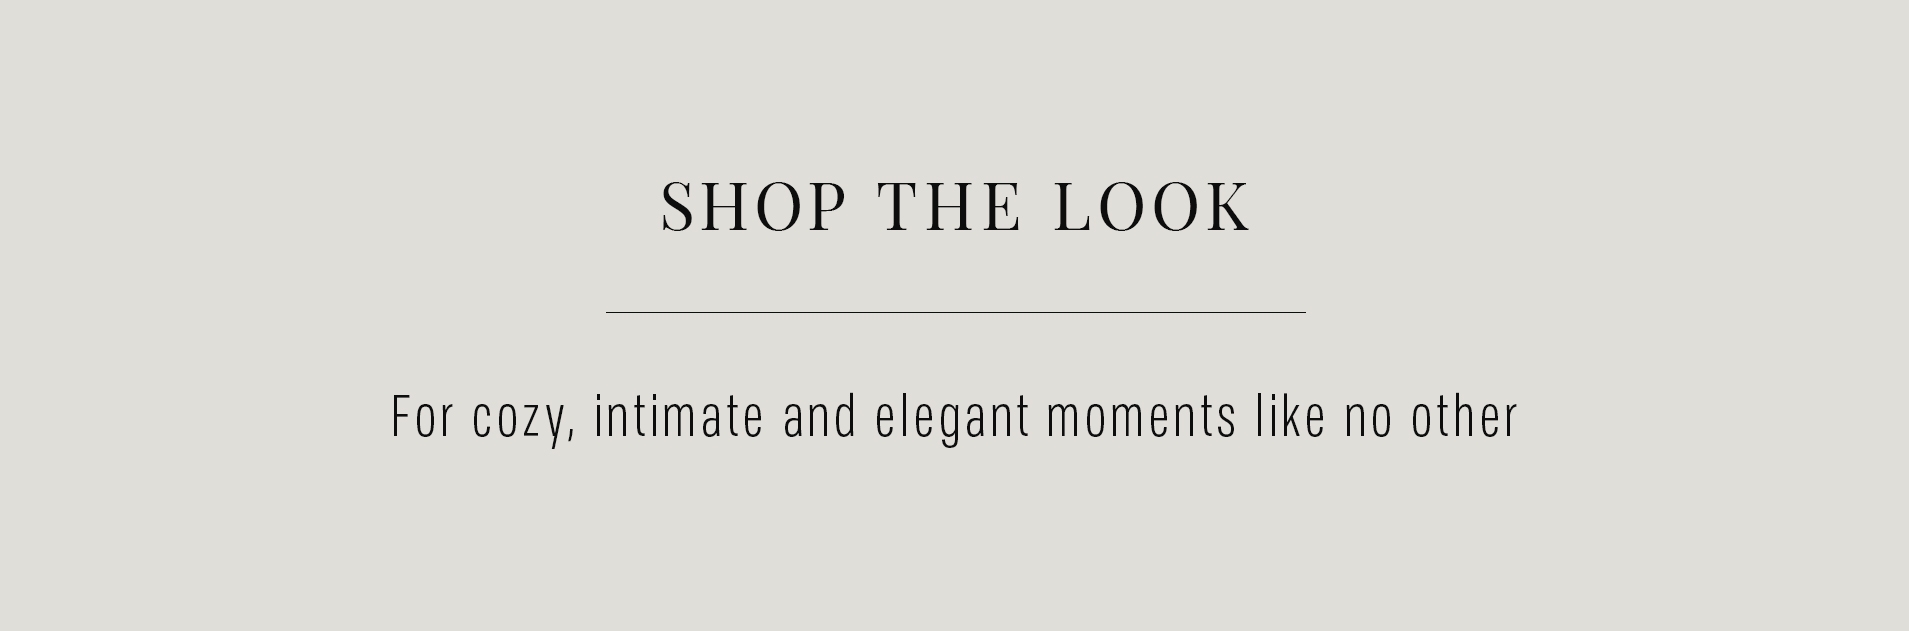 Shop The Look Banner